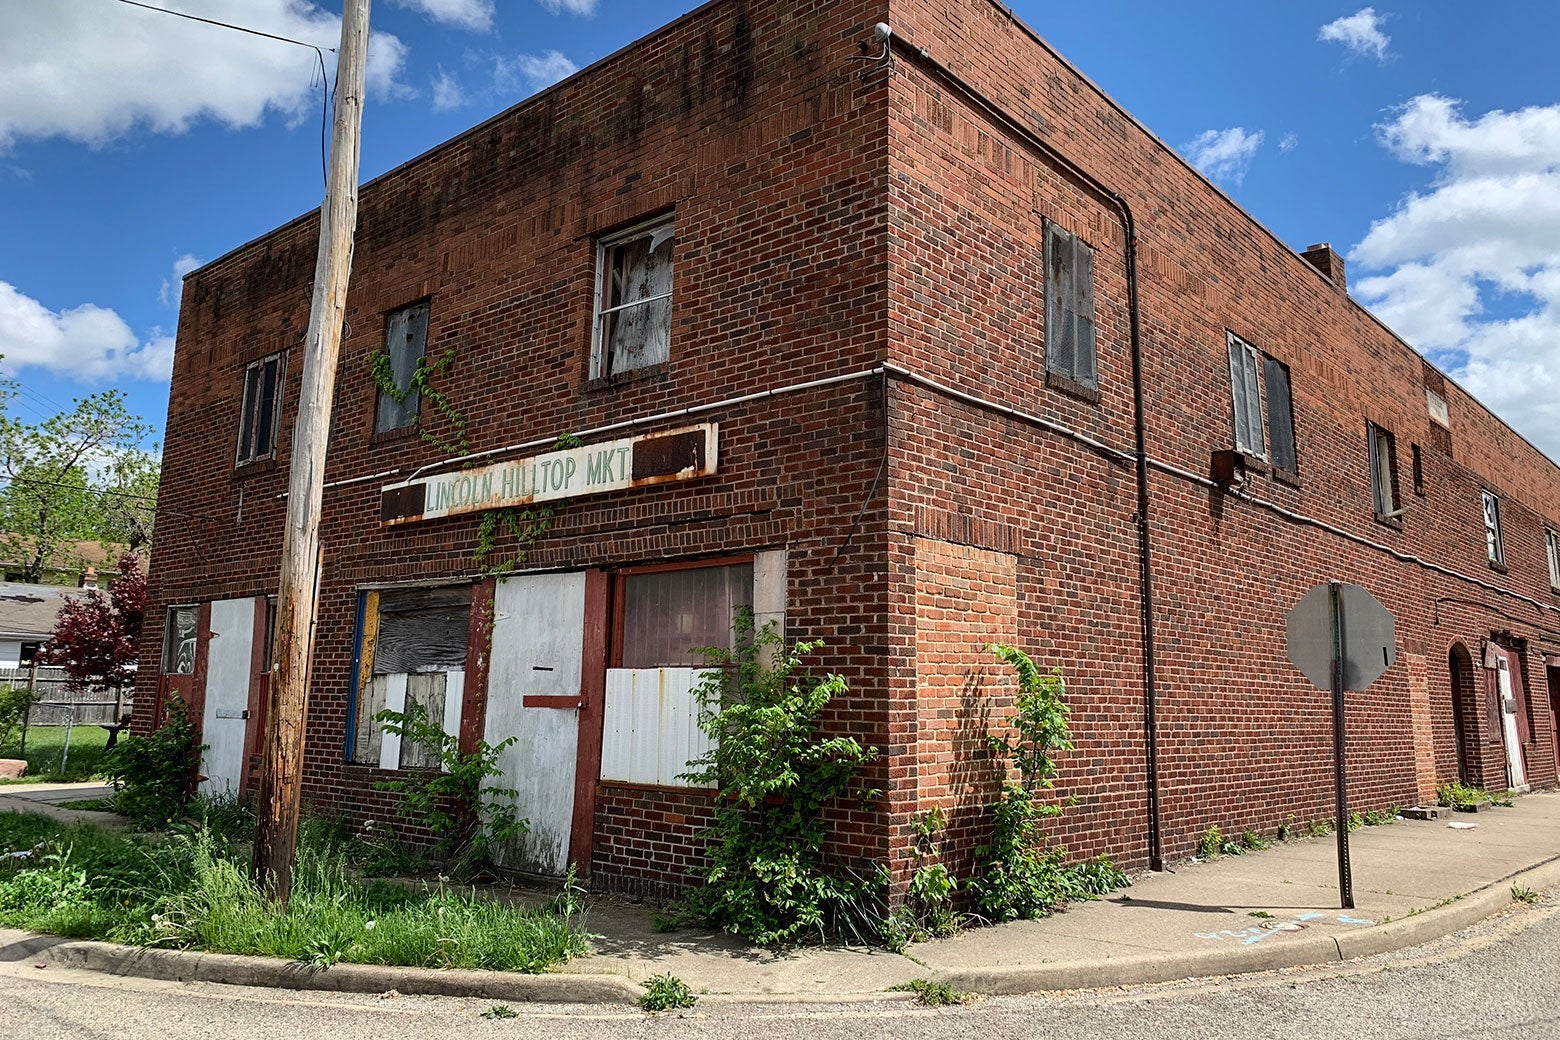 A brick two-story building with boarded-up windows on a street corner. A rusted sign says "Lincoln Hilltop Mkt."